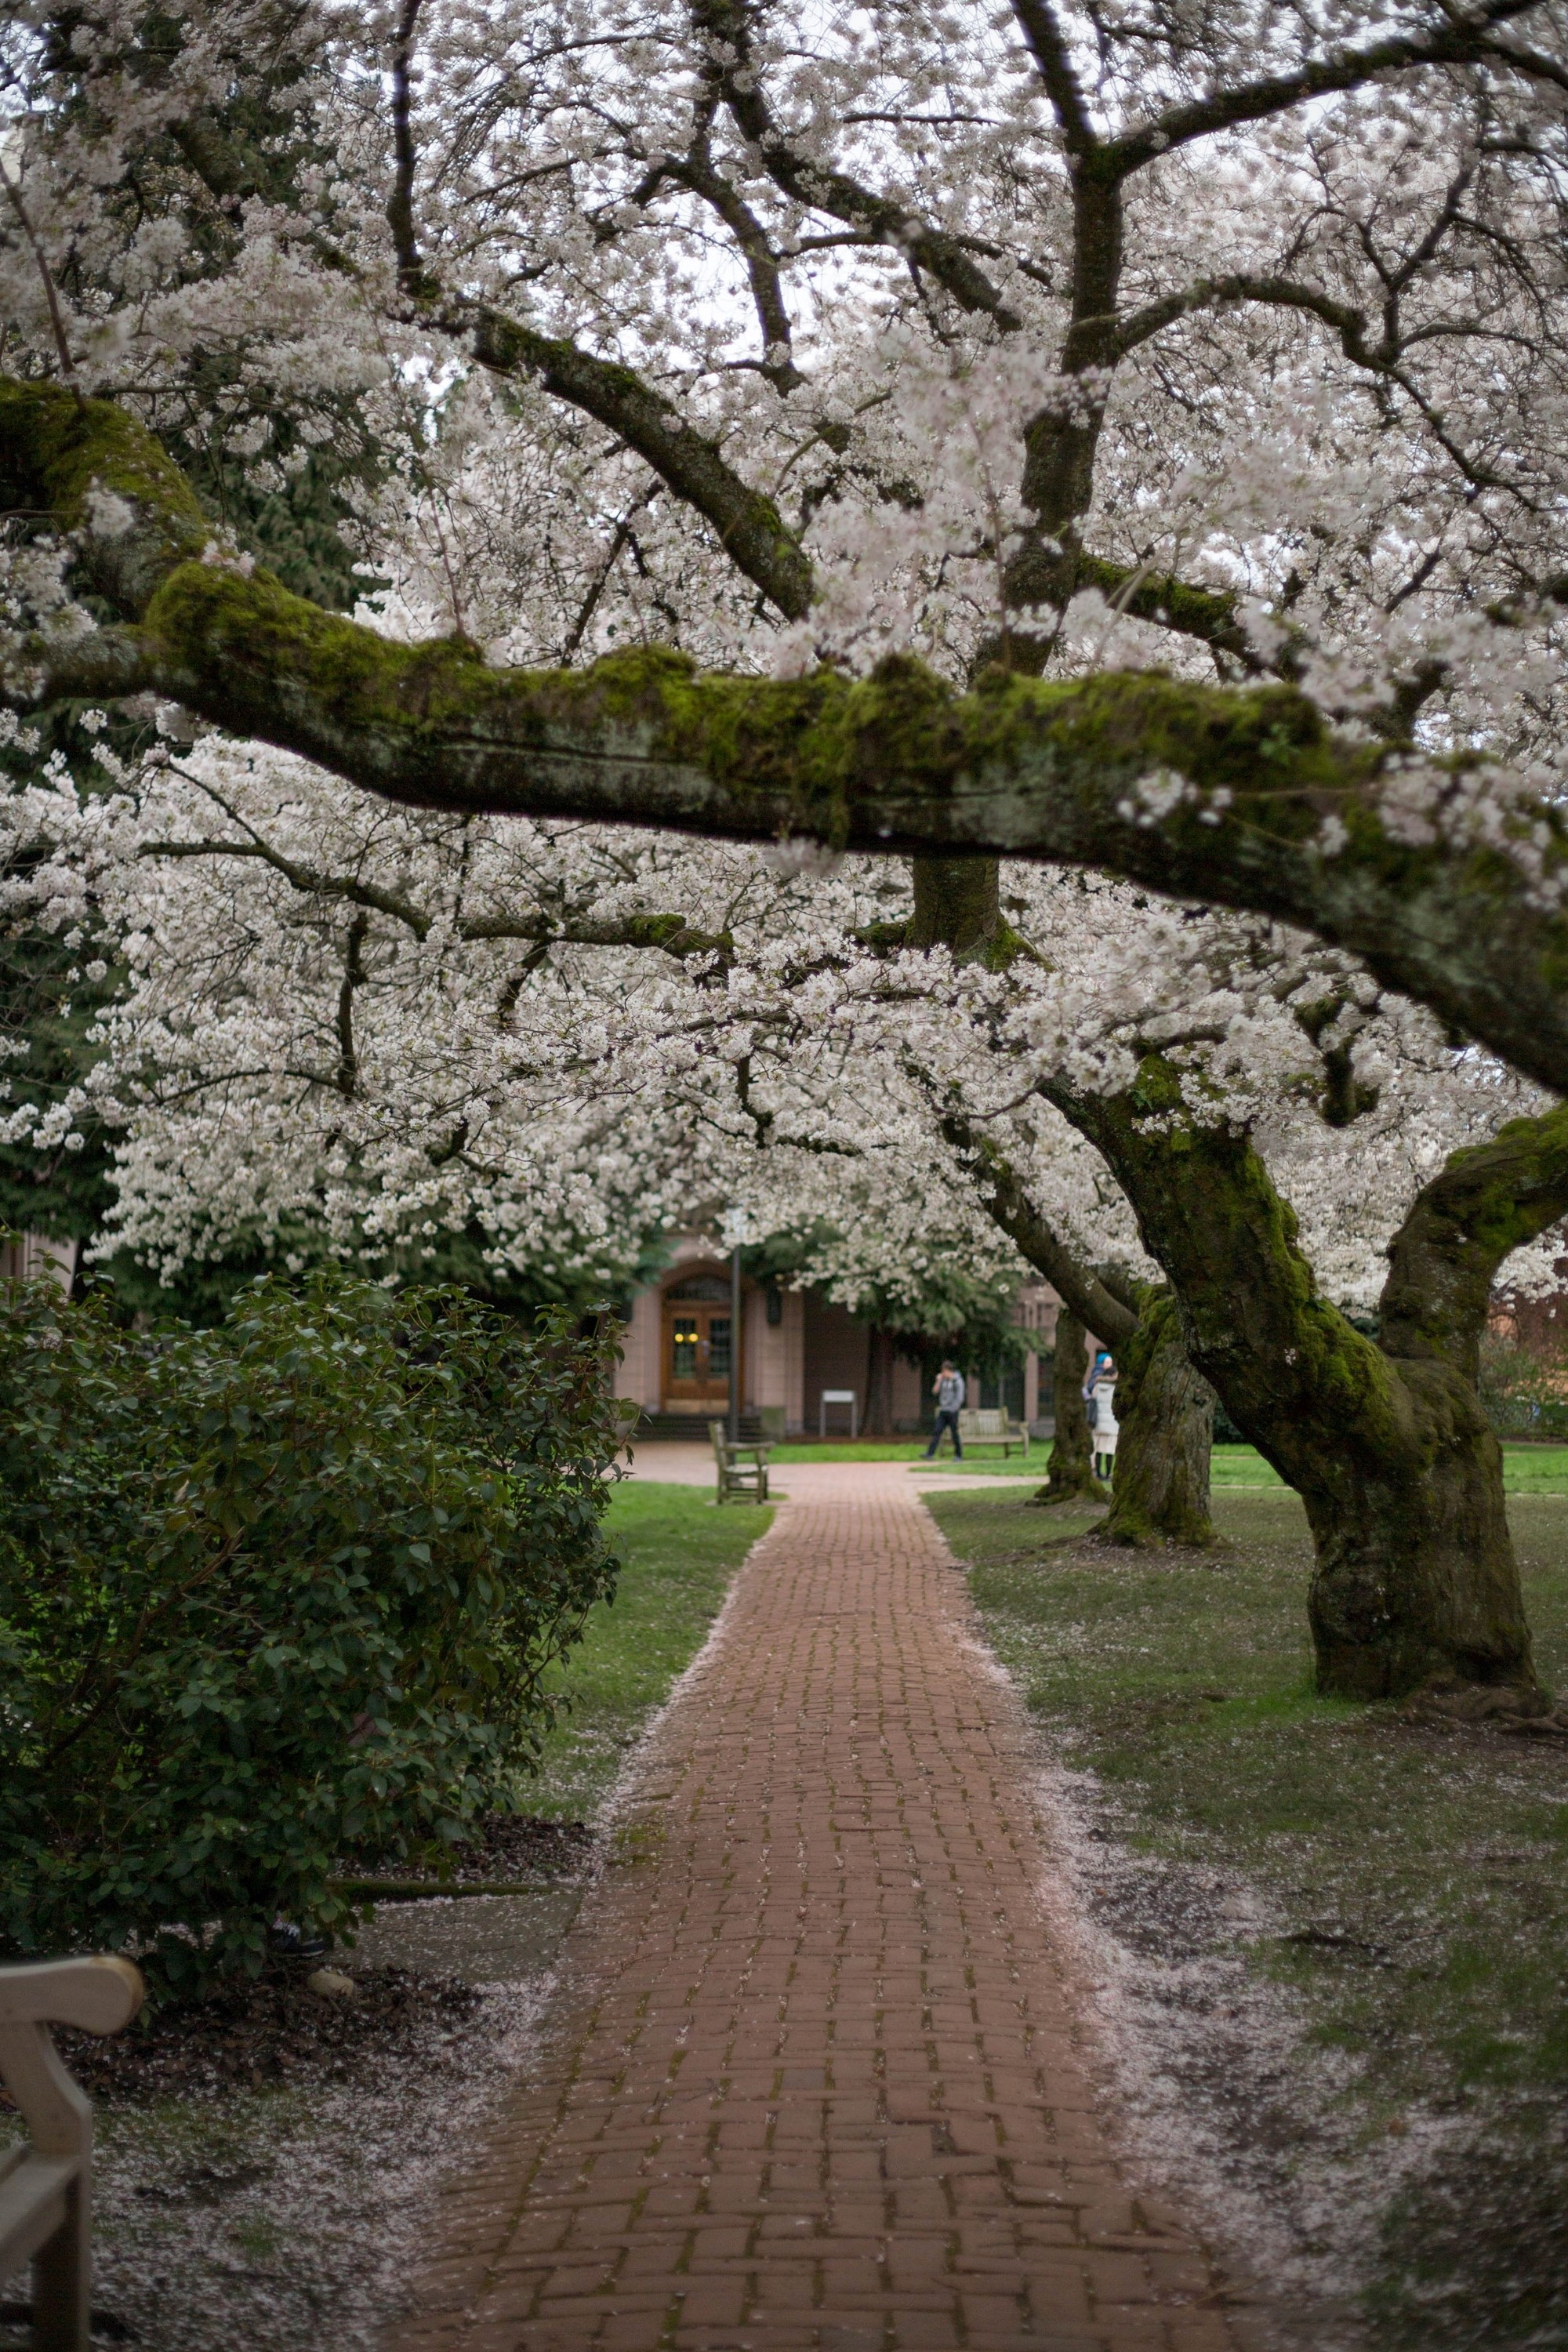 Brick pathway under an arch of cherry blosson trees